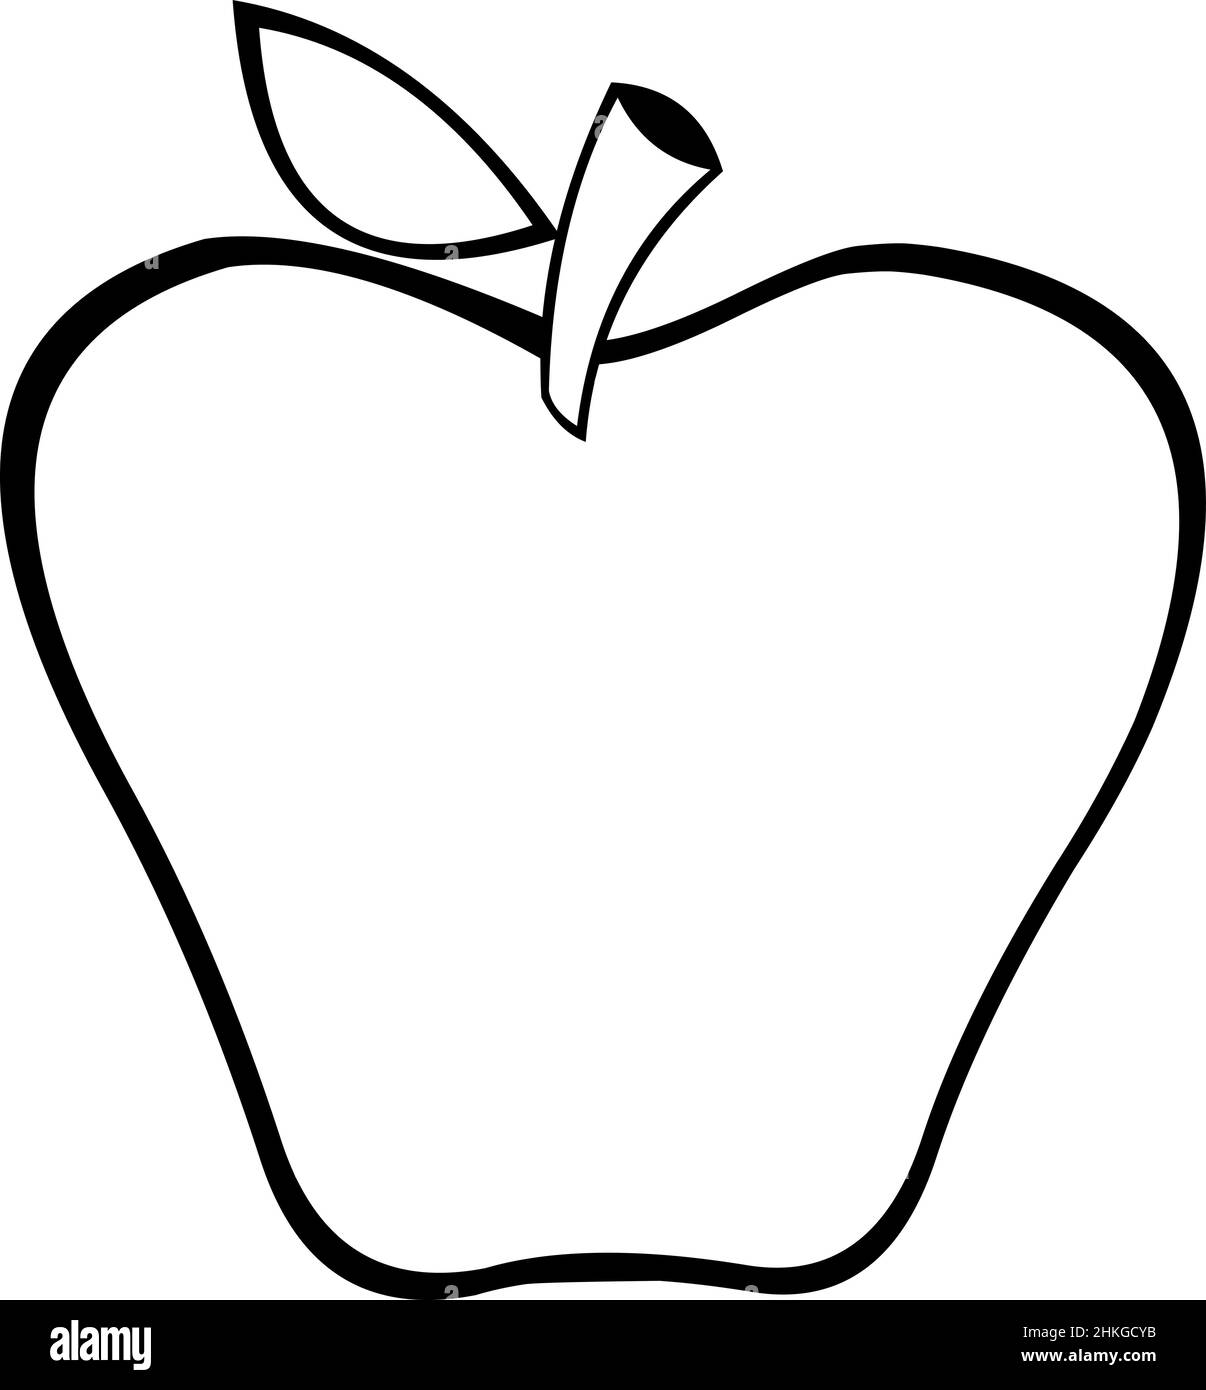 Vector illustration of an apple drawn in black and white Stock Vector